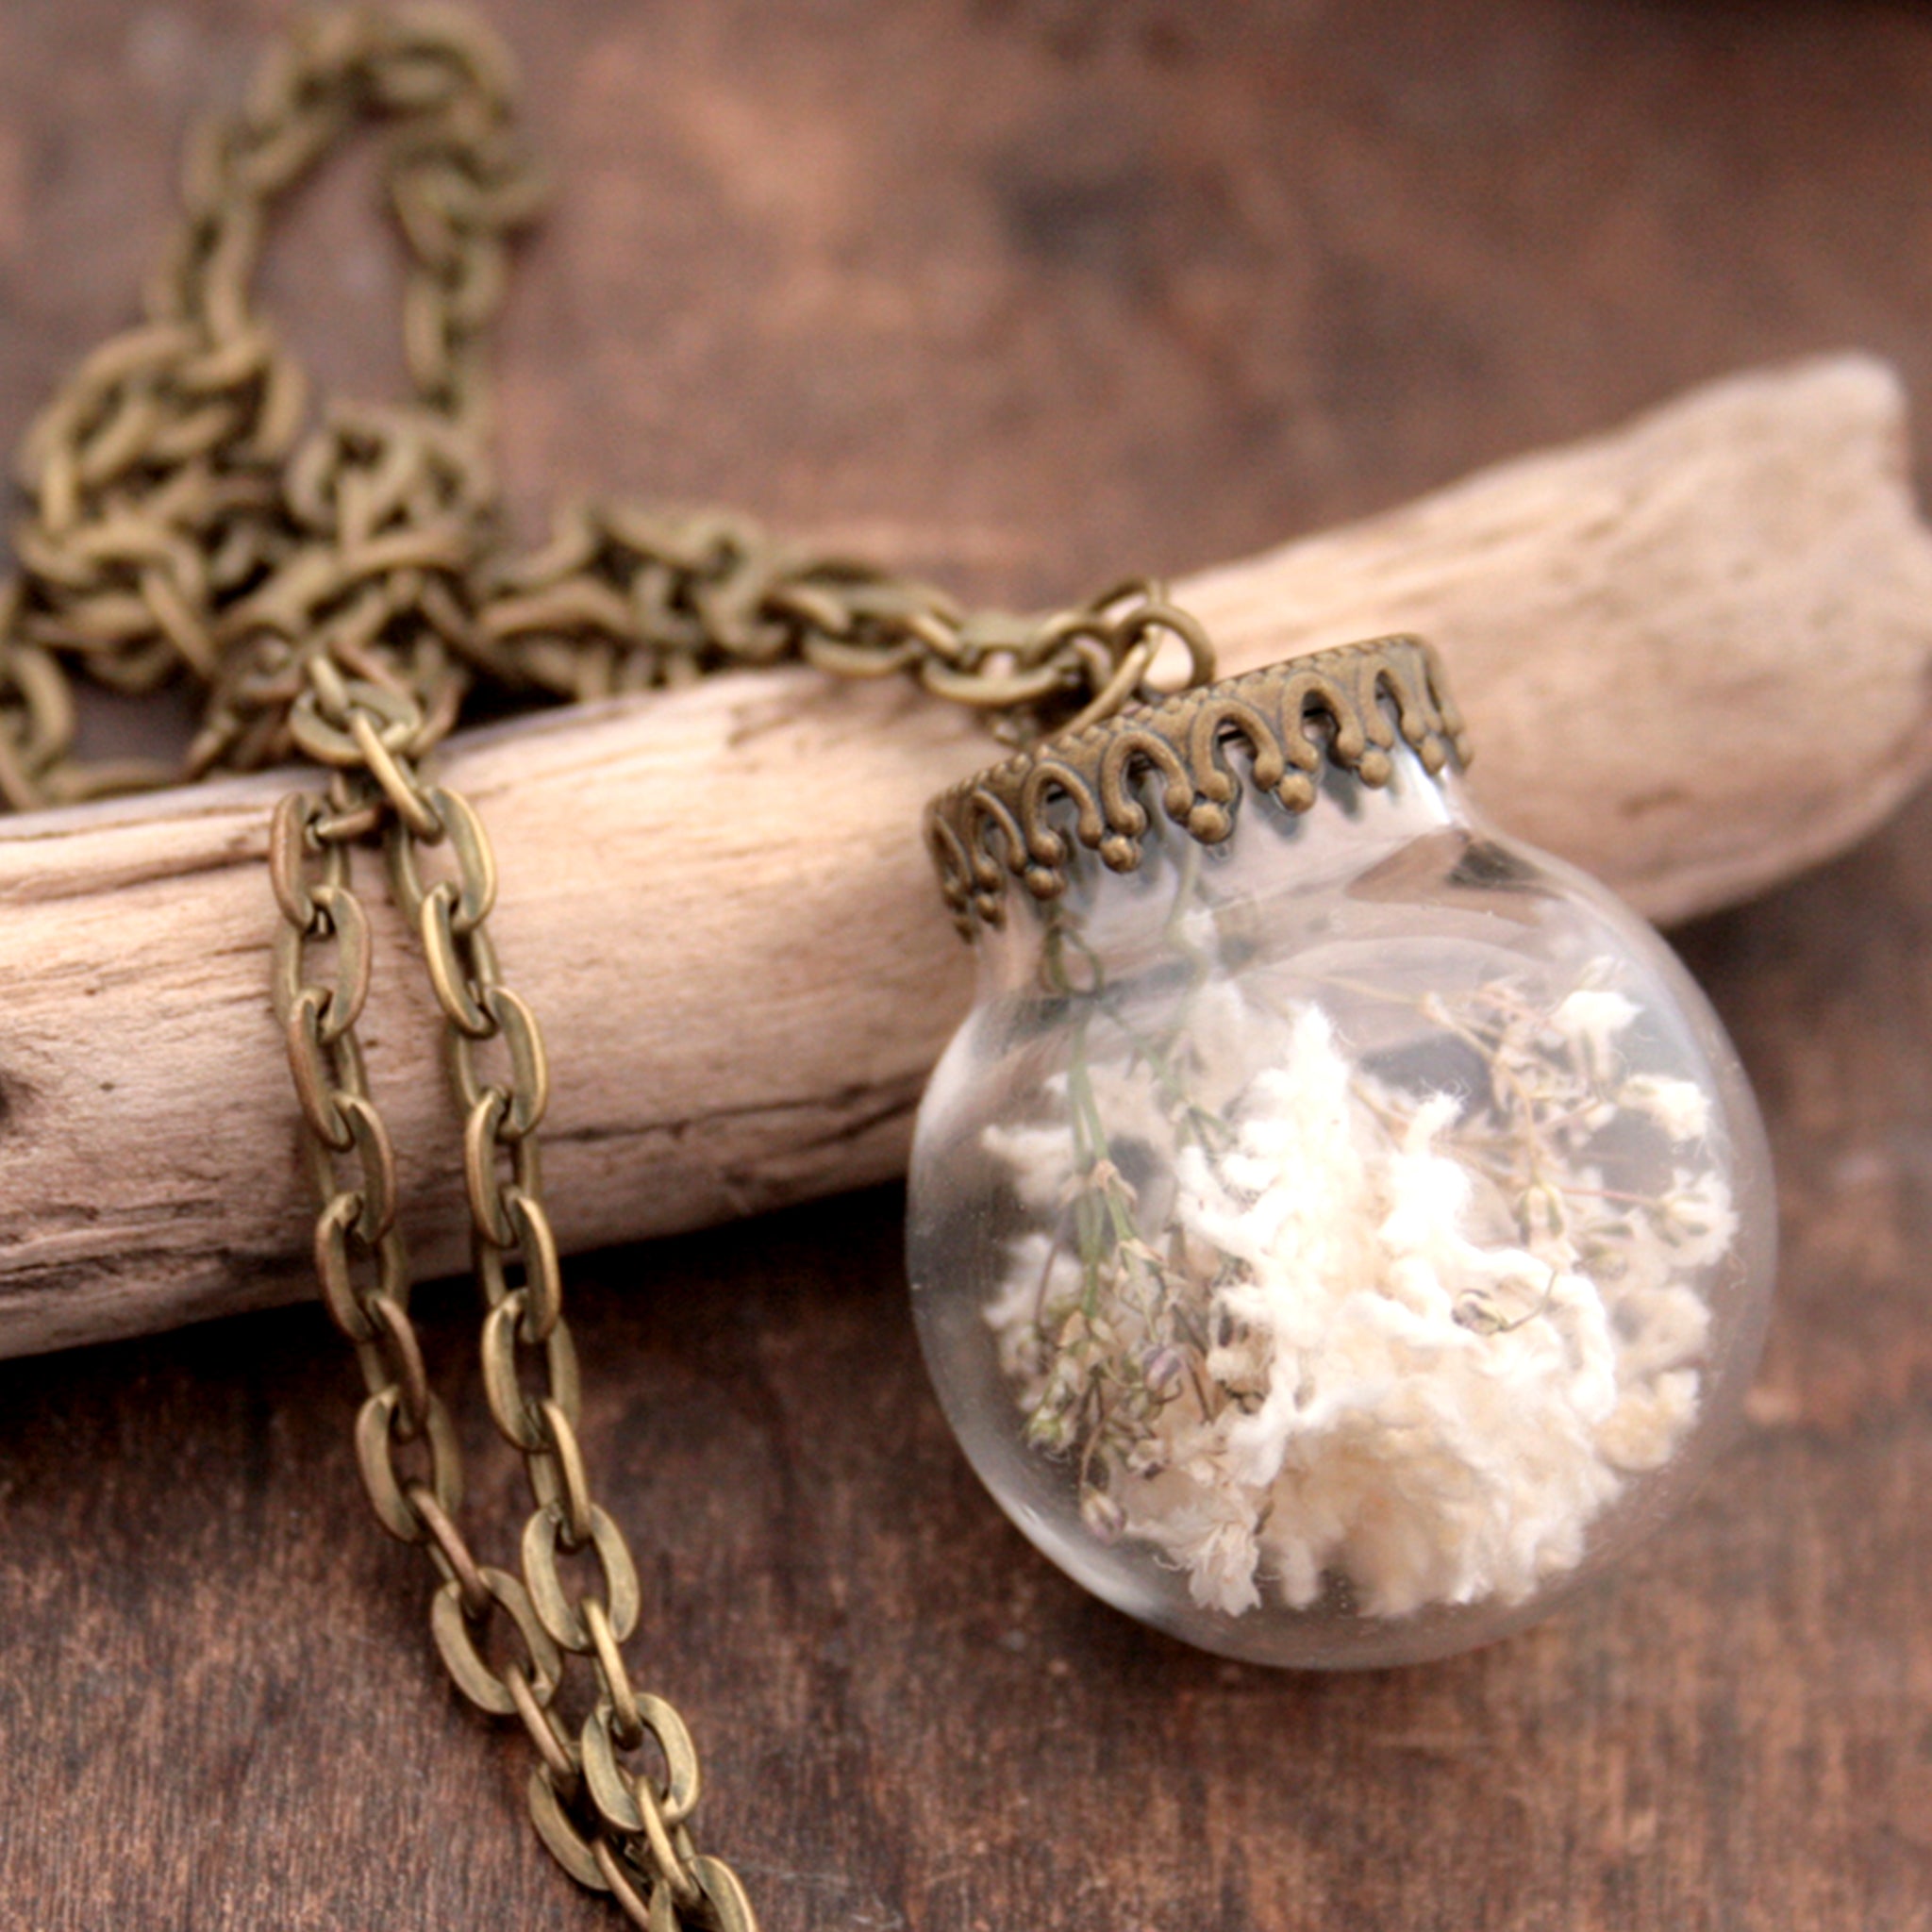 Rustic Terrarium Necklace with Dried Flowers